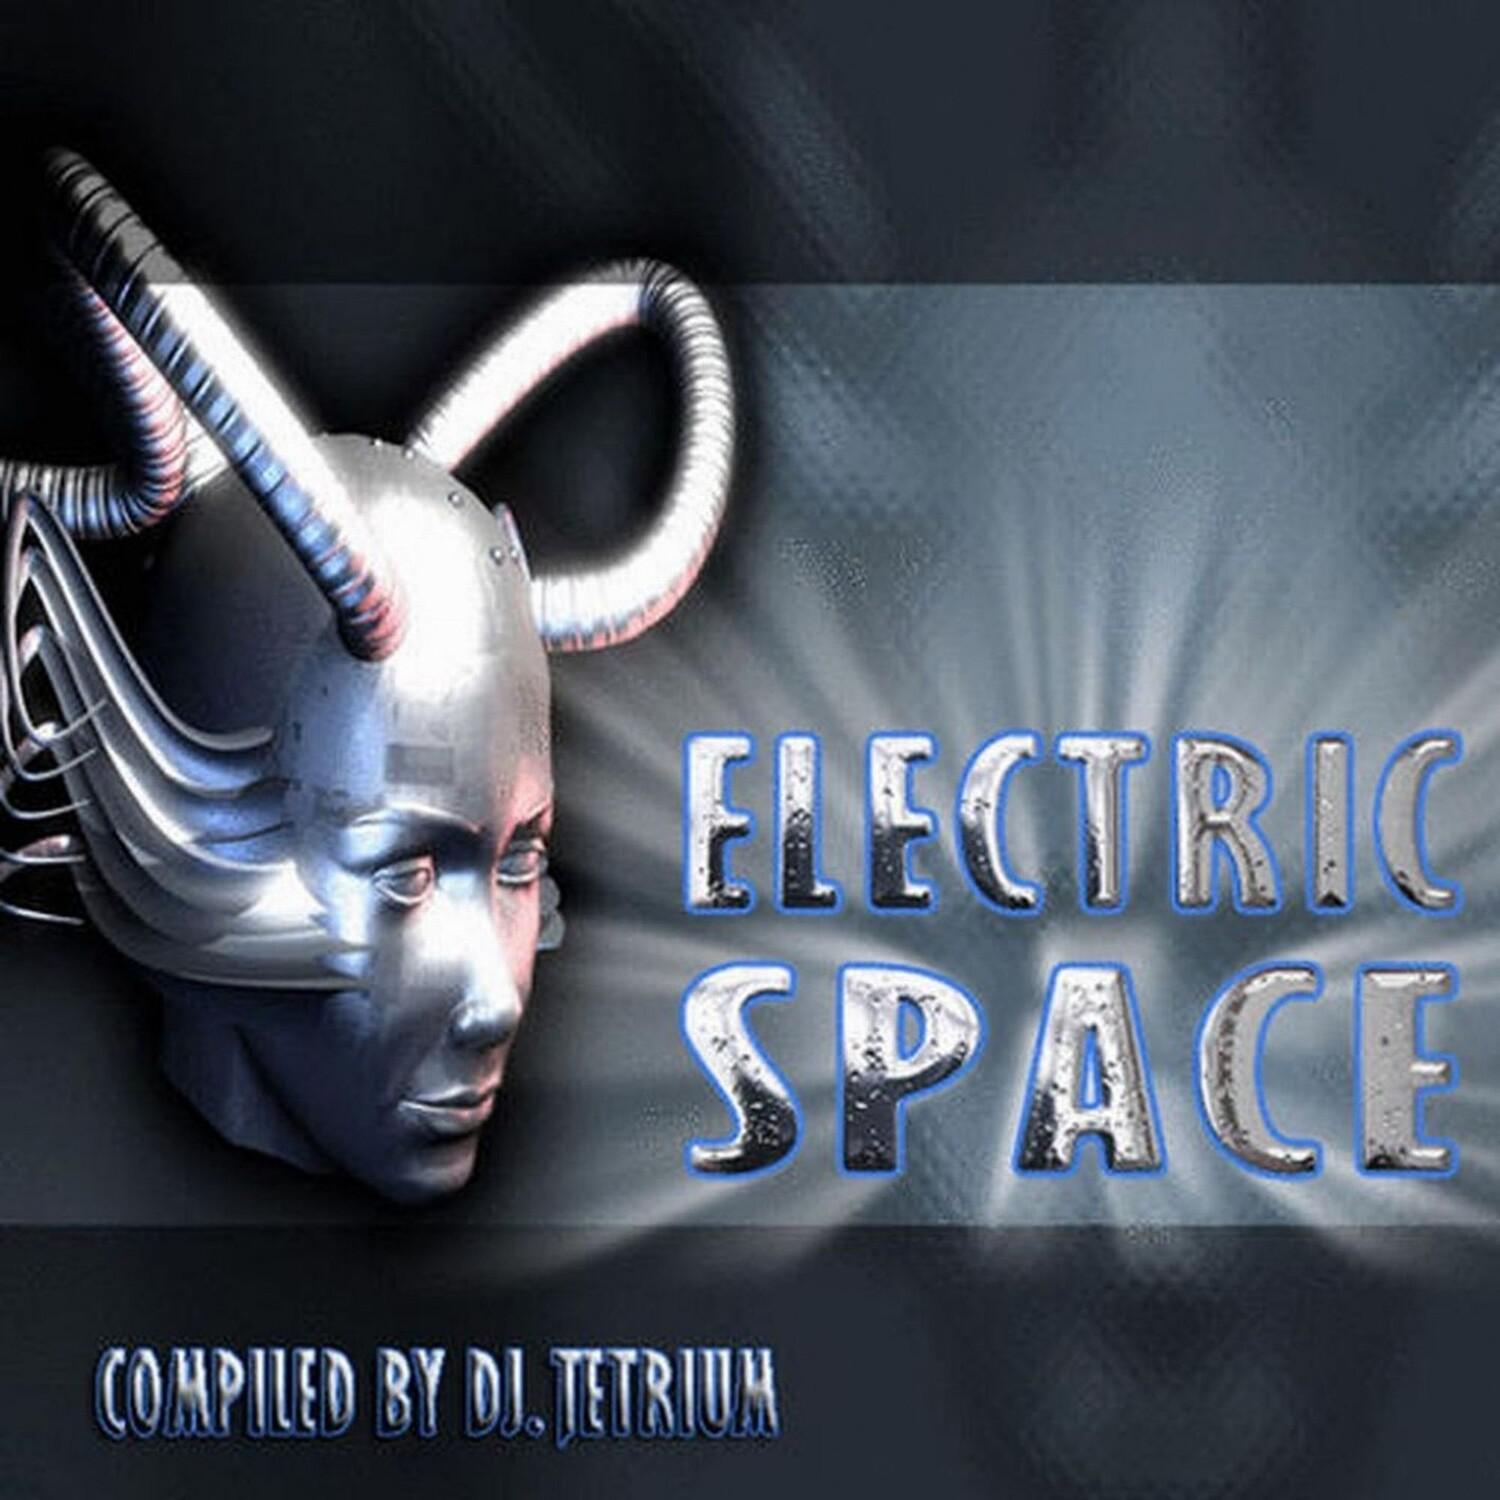 Electric Space